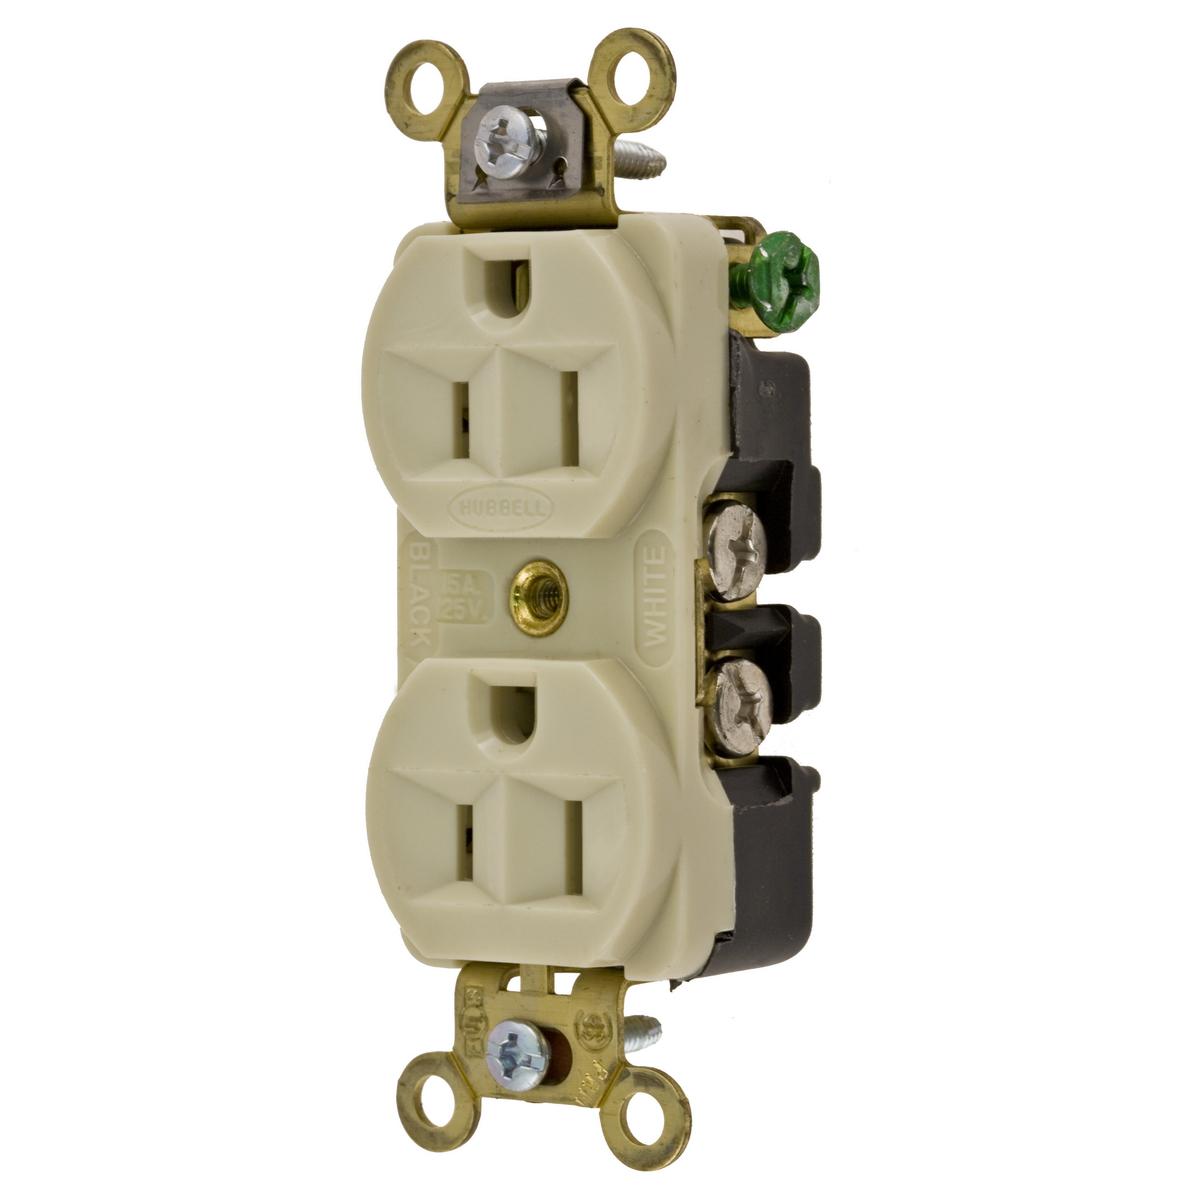 Hubbell HBL5252I Hubbell Wiring Device Kellems, Straight Blade Devices, Receptacles, Duplex, Industrial Grade, 2-Pole 3-Wire Grounding, 15A 125V, 5-15R, Ivory, Single Pack  ; Slender/compact design ; Brass Mounting Strap ; Triple wipe contacts ; Compact design and Self Gr